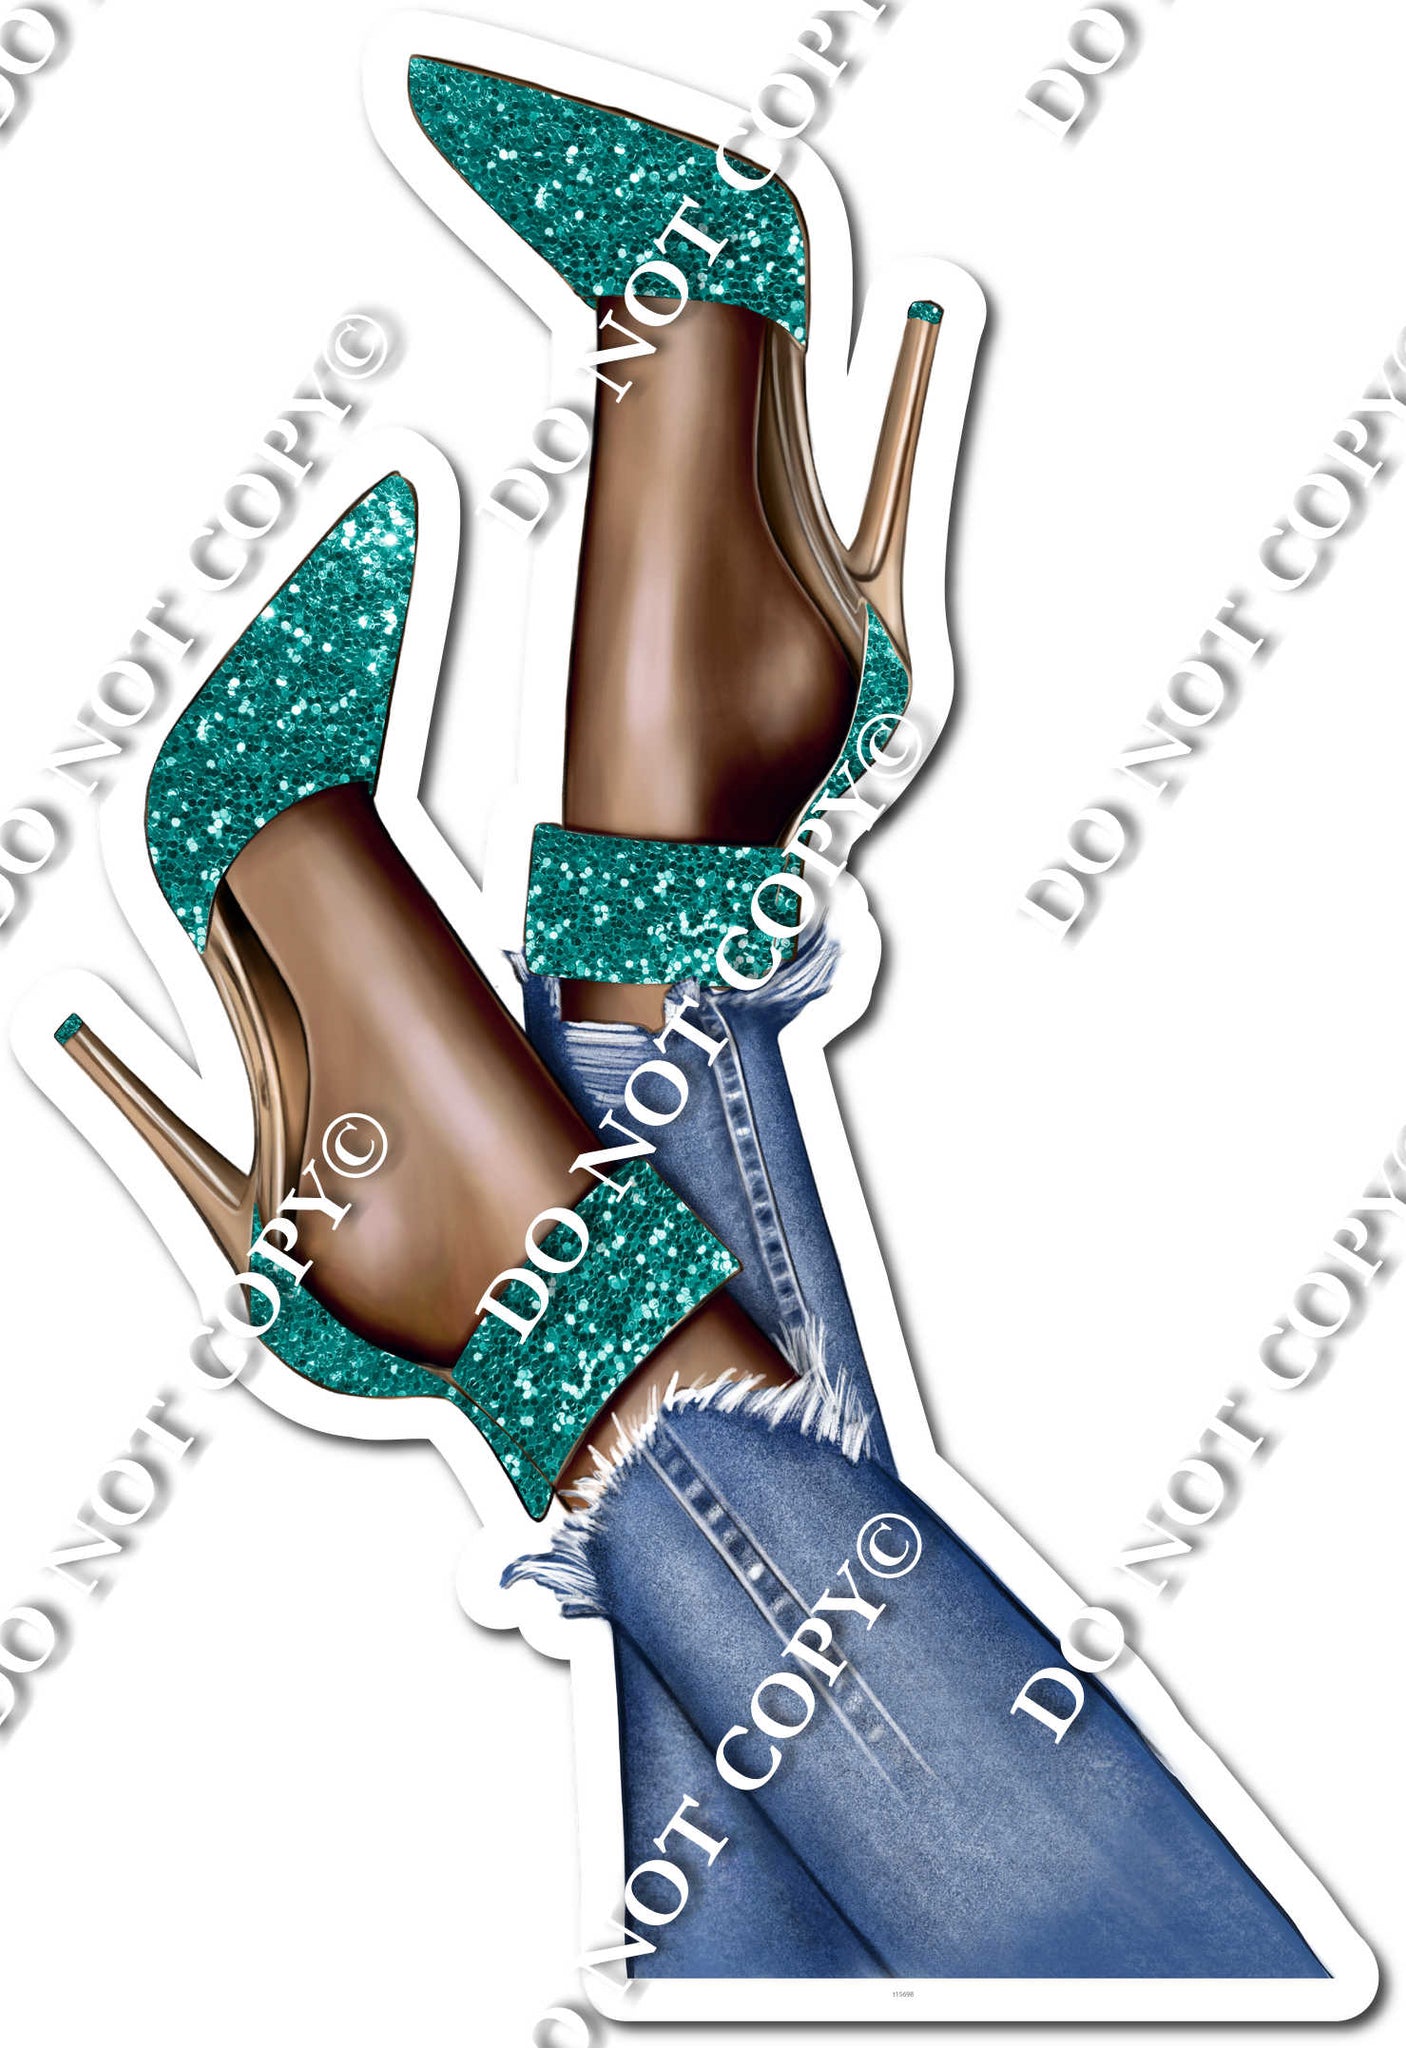 Buy Teal Wedding Shoes PEACOCK Satin Heels, Hand Embellished Teal Shoes  Organza Flowers & Beads Slingback, Open Peep Toe, Accessory Online in India  - Etsy